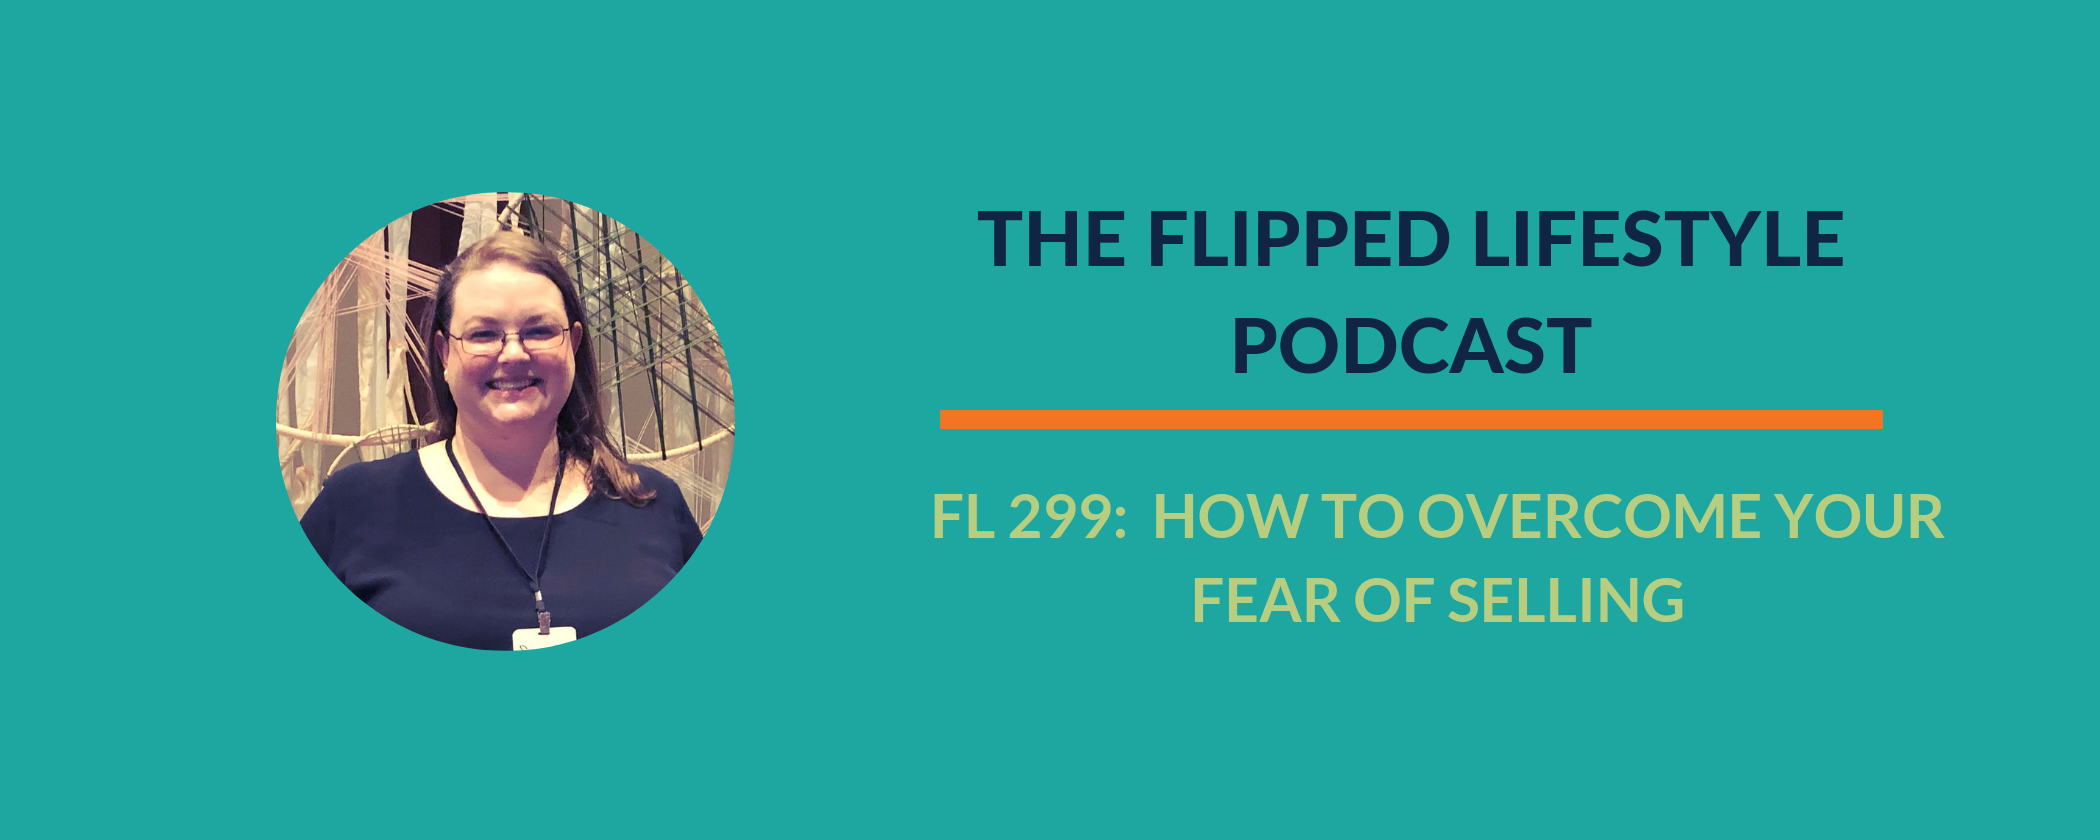 EARLY PODCAST: FL 299 – How to Overcome Your Fear of Selling